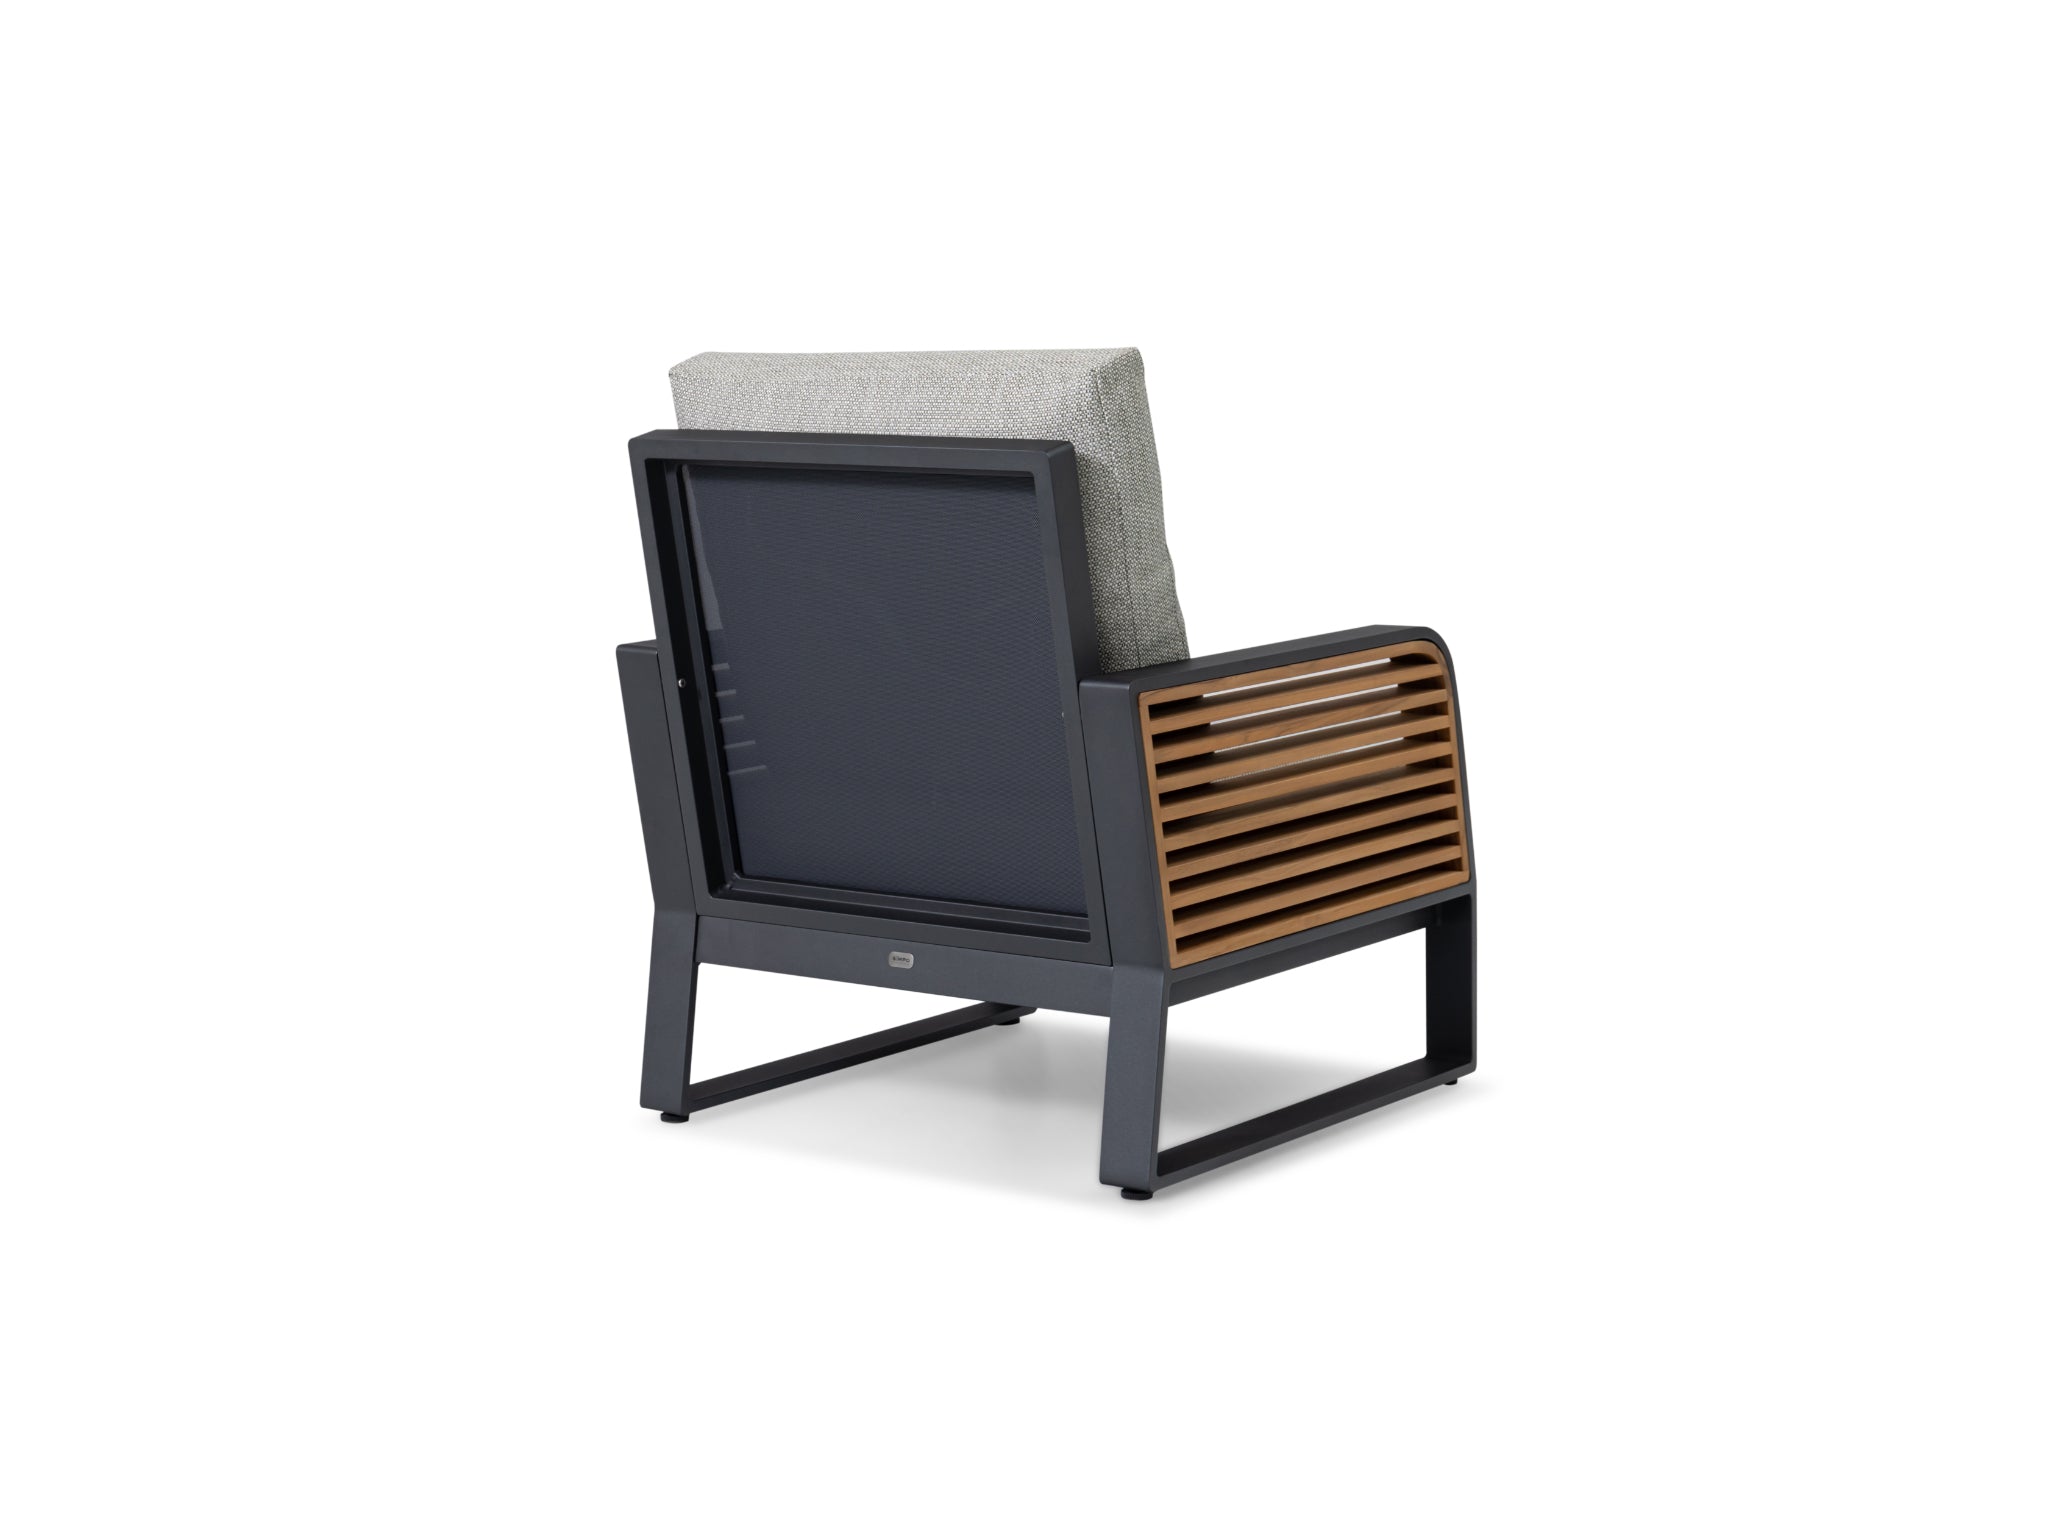 SIMPO by Sunlongarden Yacht Lounge Chair